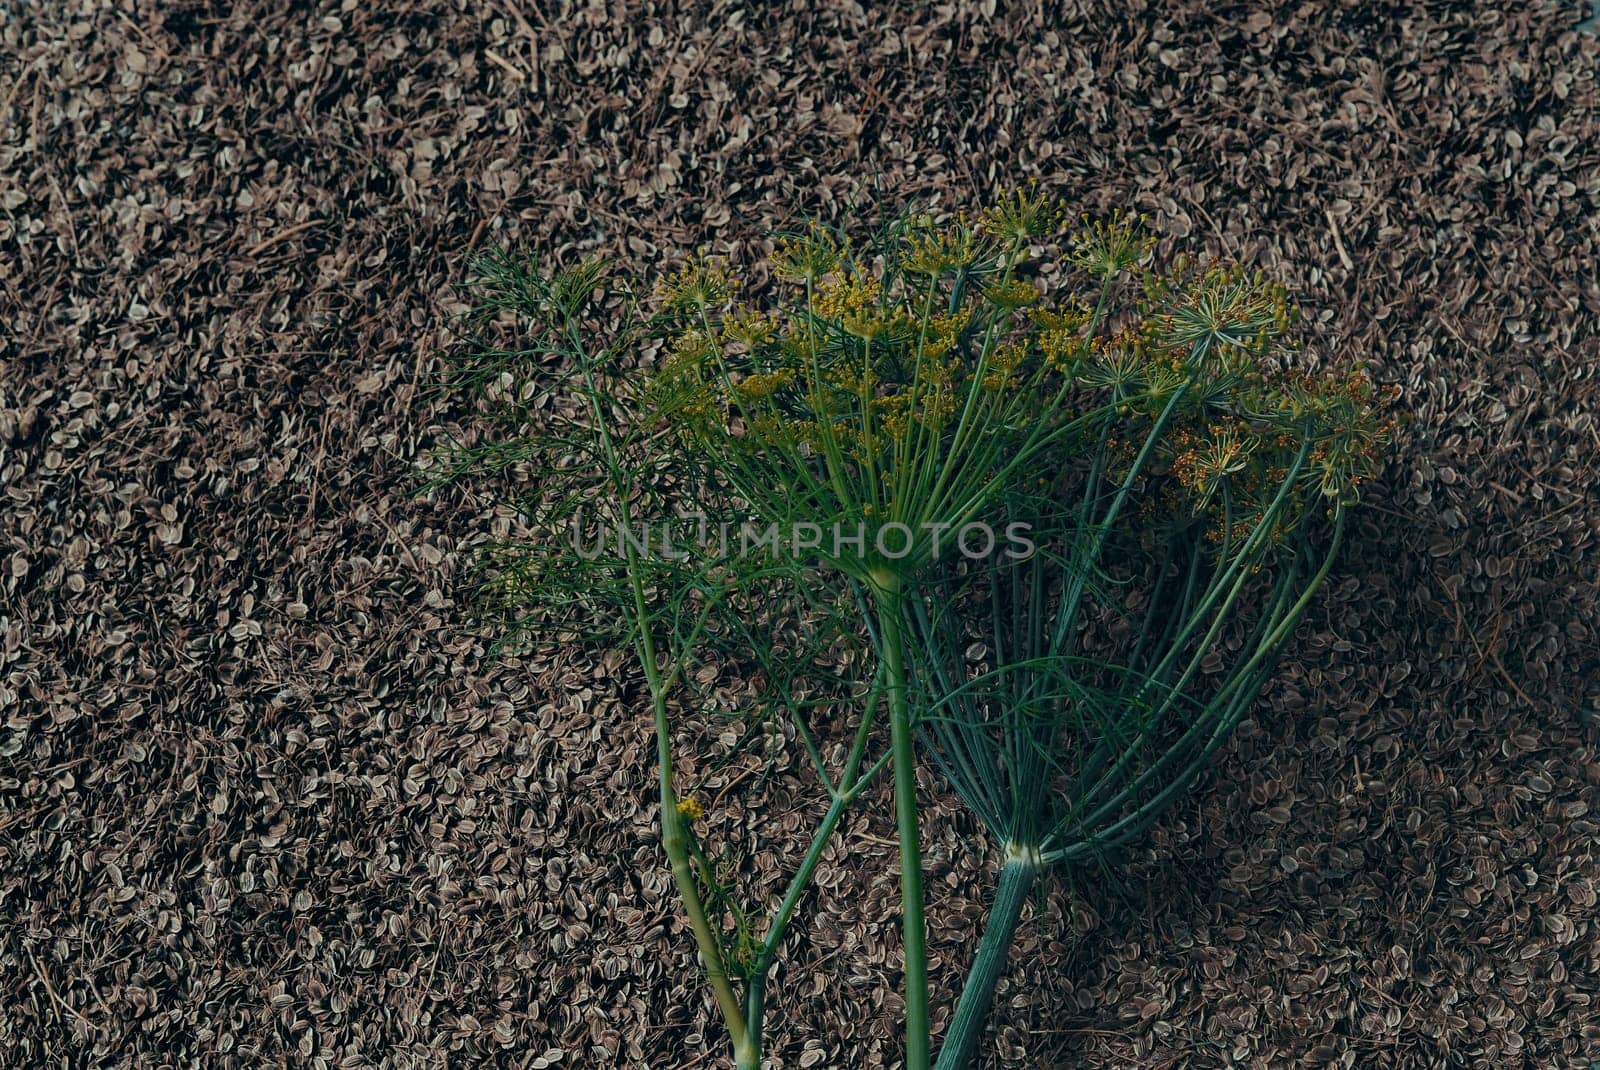 Background with raw organic dill seeds with a green sprig of dill. Plant, food and medical themes